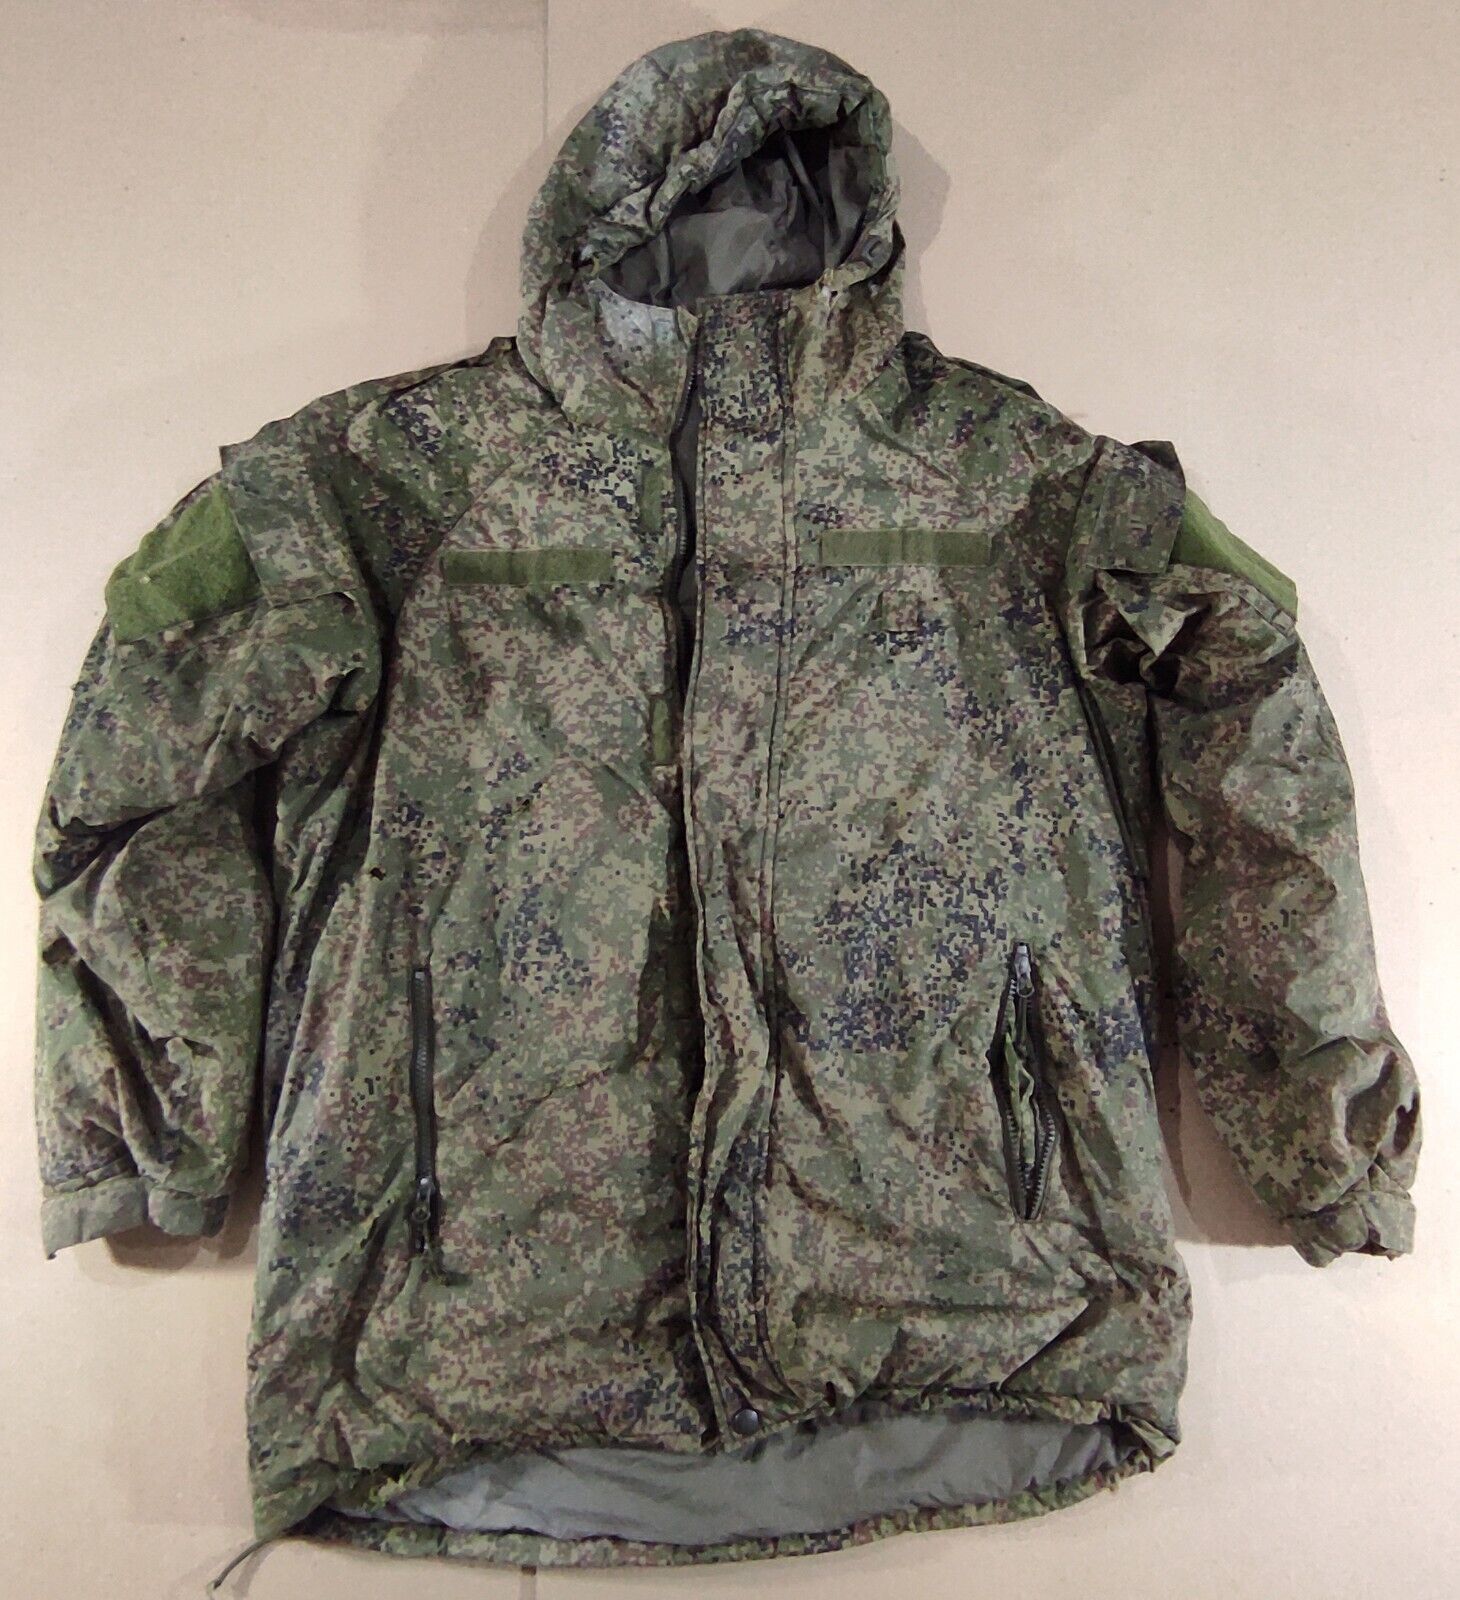 Russian military winter jacket